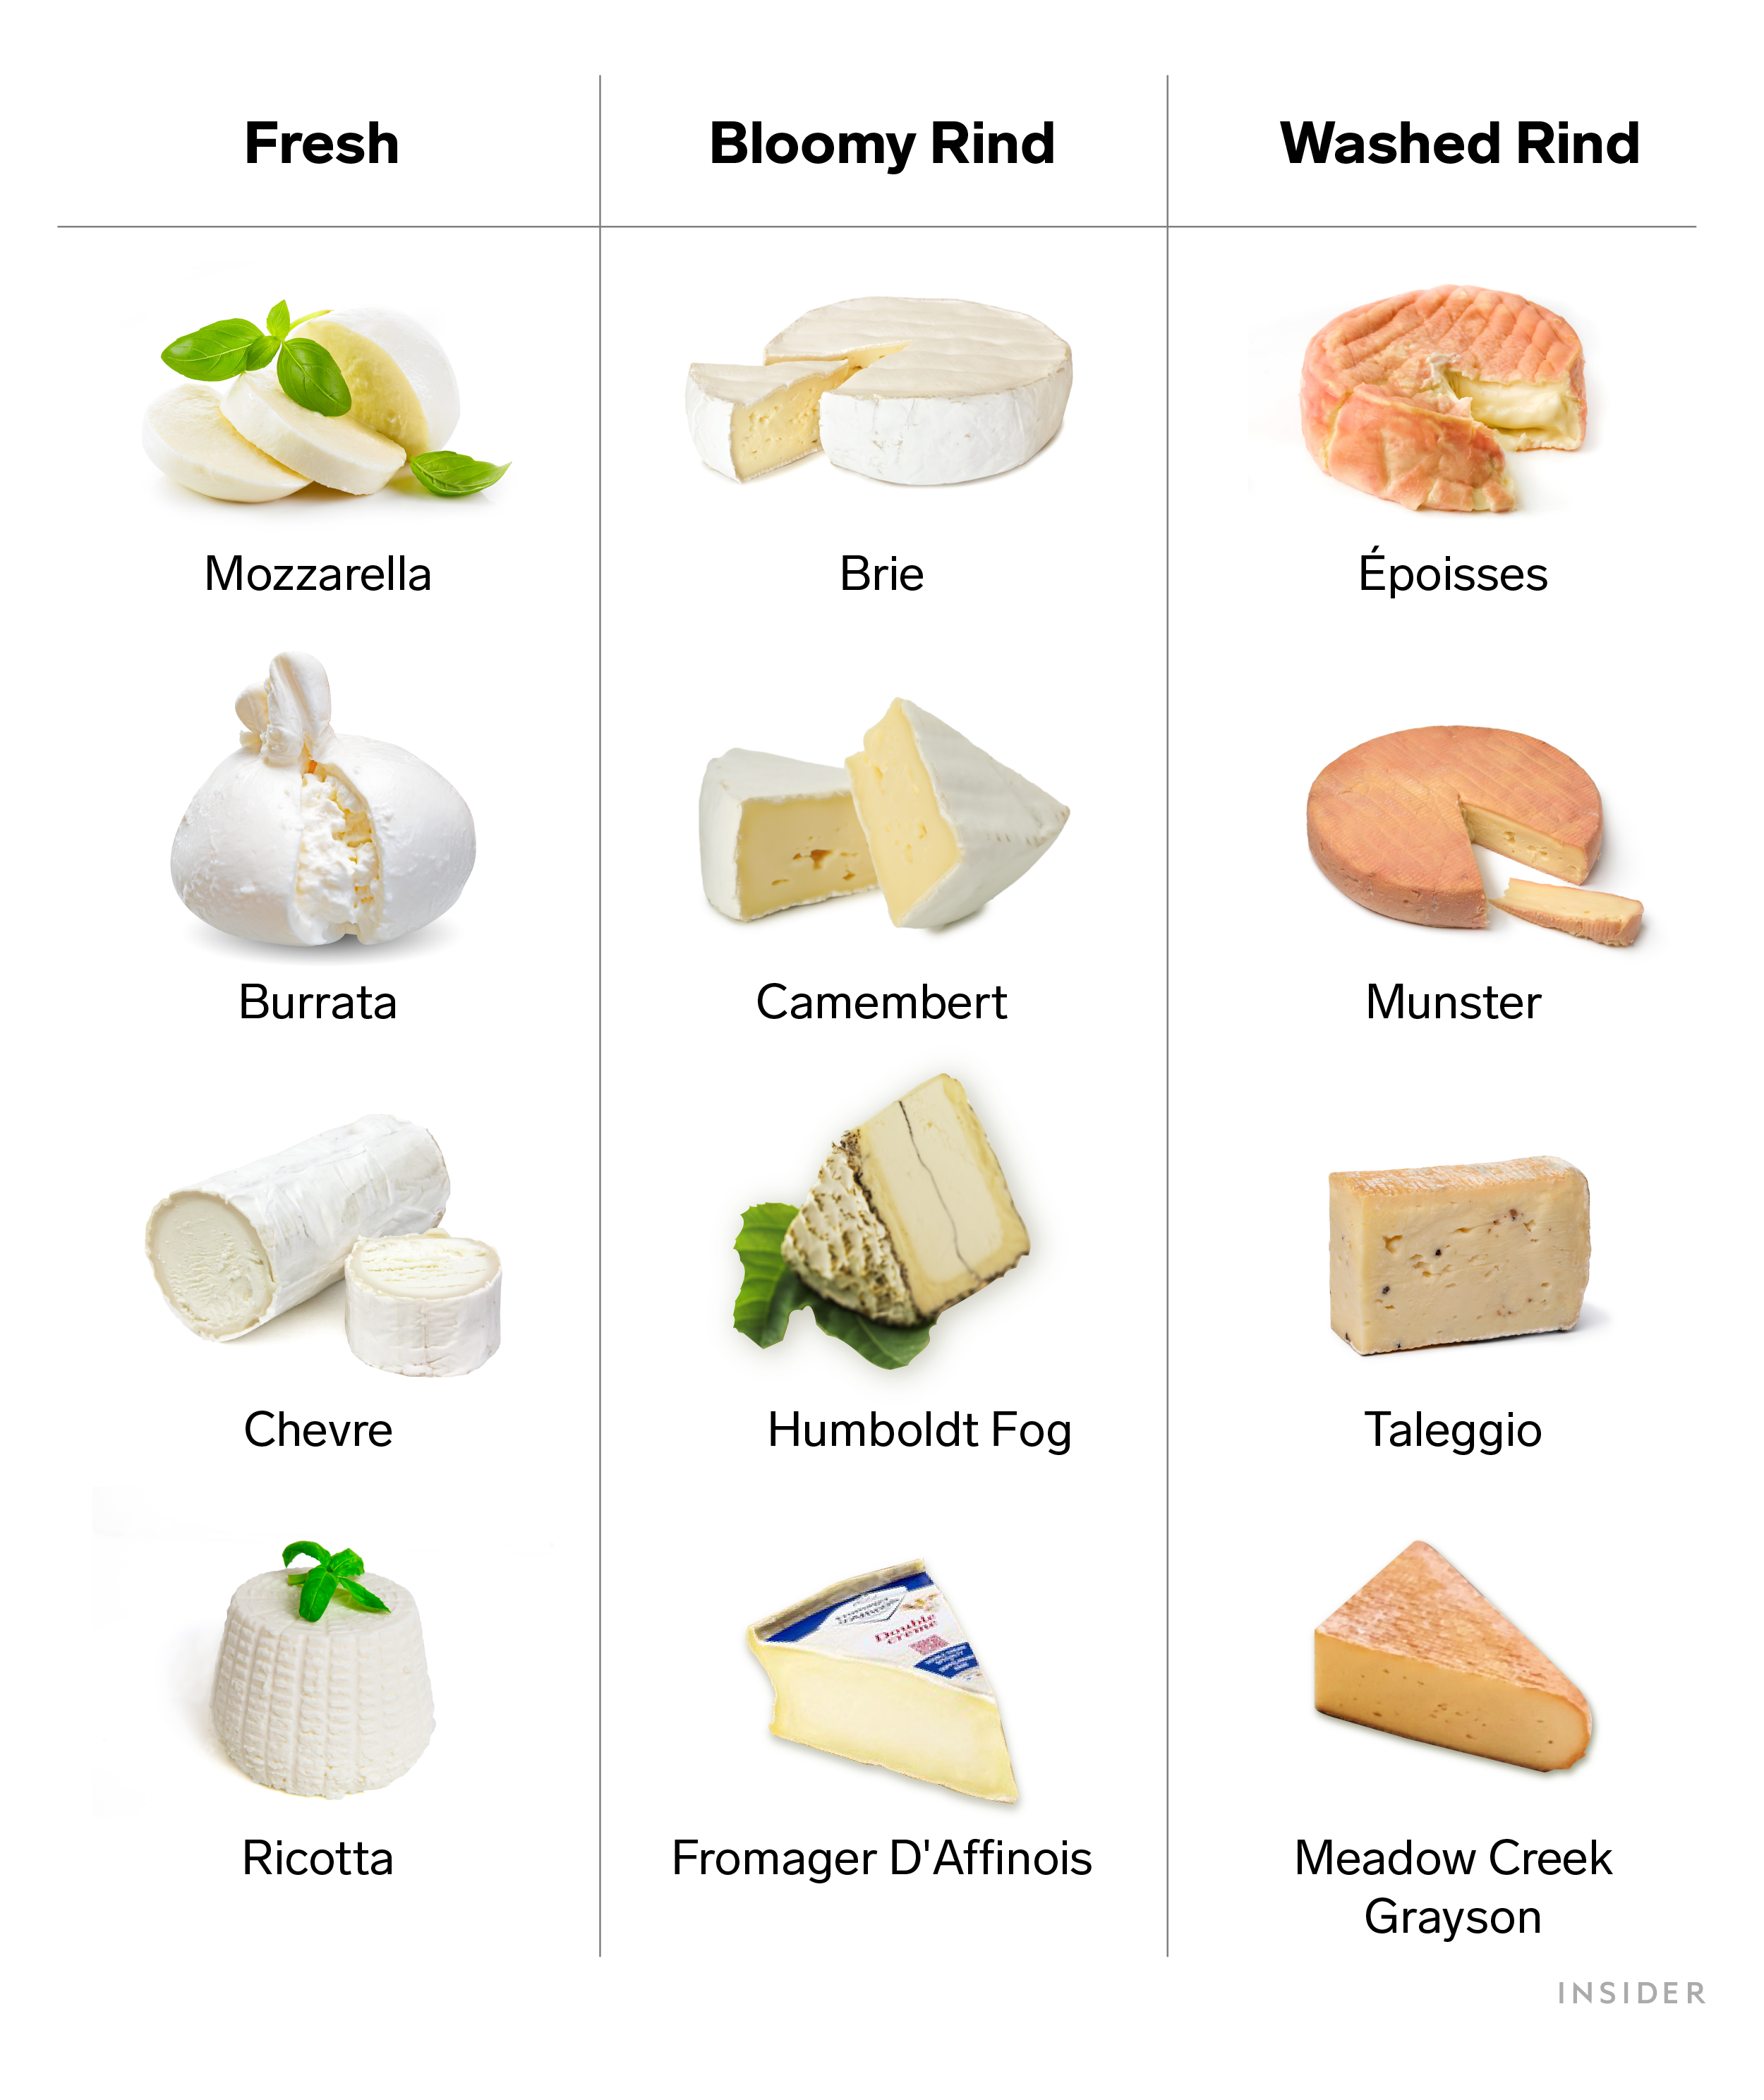 Table showing the different categories of soft cheese: fresh; bloomy rind; and washed rind